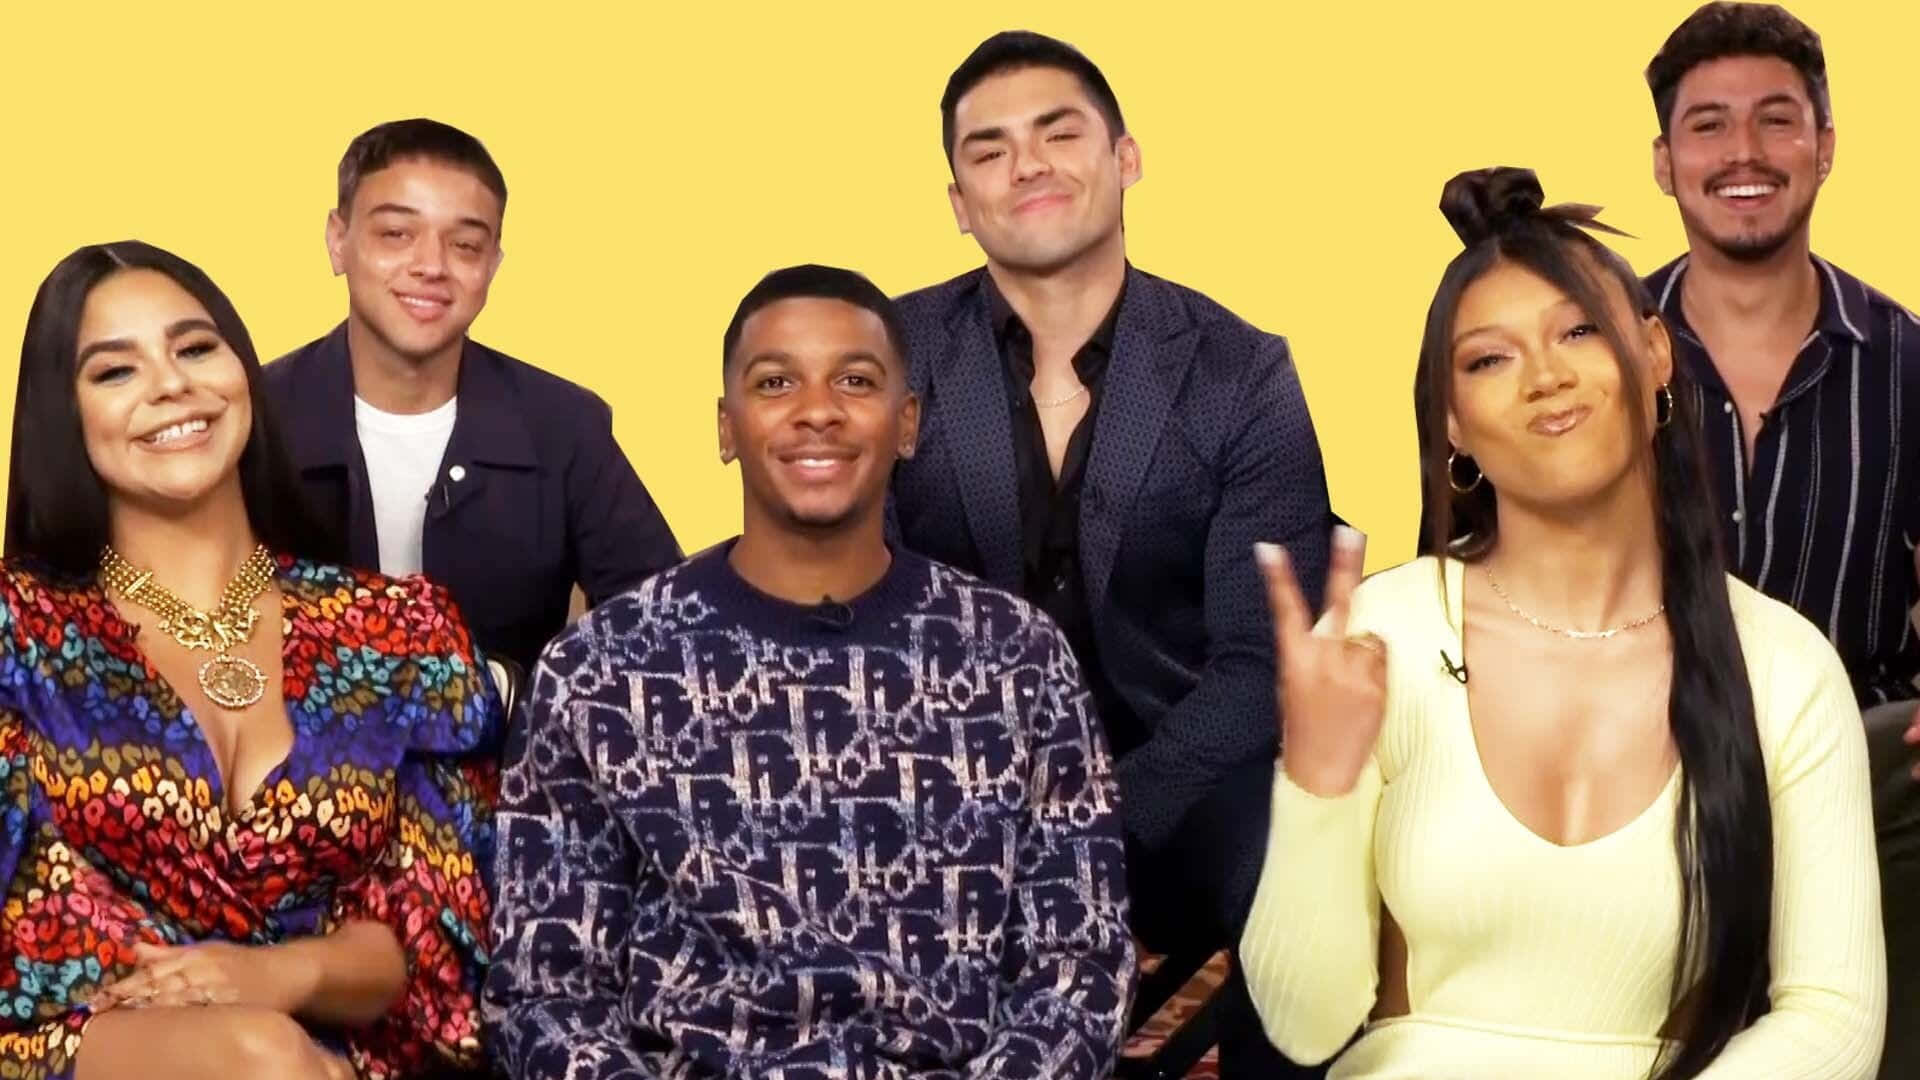 The four best friends from "On My Block" Wallpaper